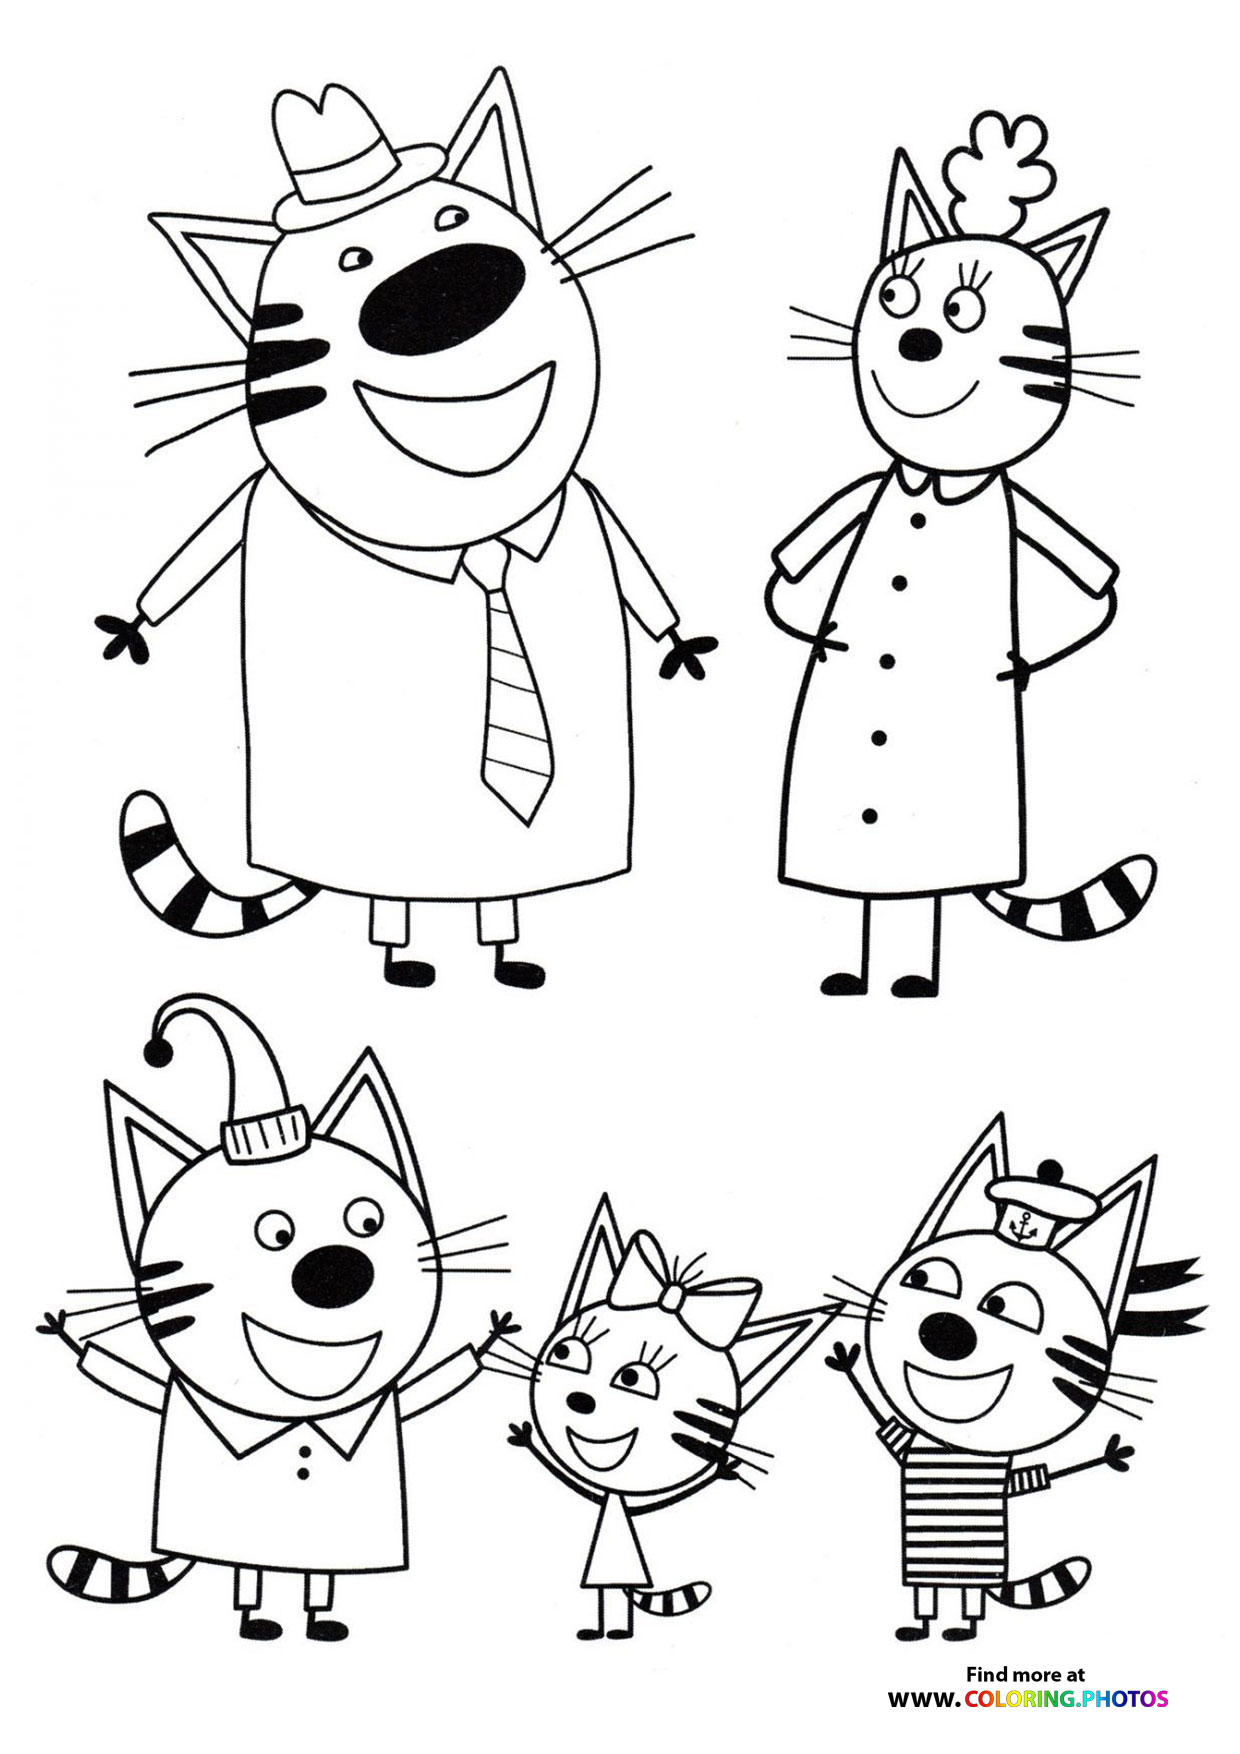 Kid E Cats   Coloring Pages for kids   Free and easy print or download